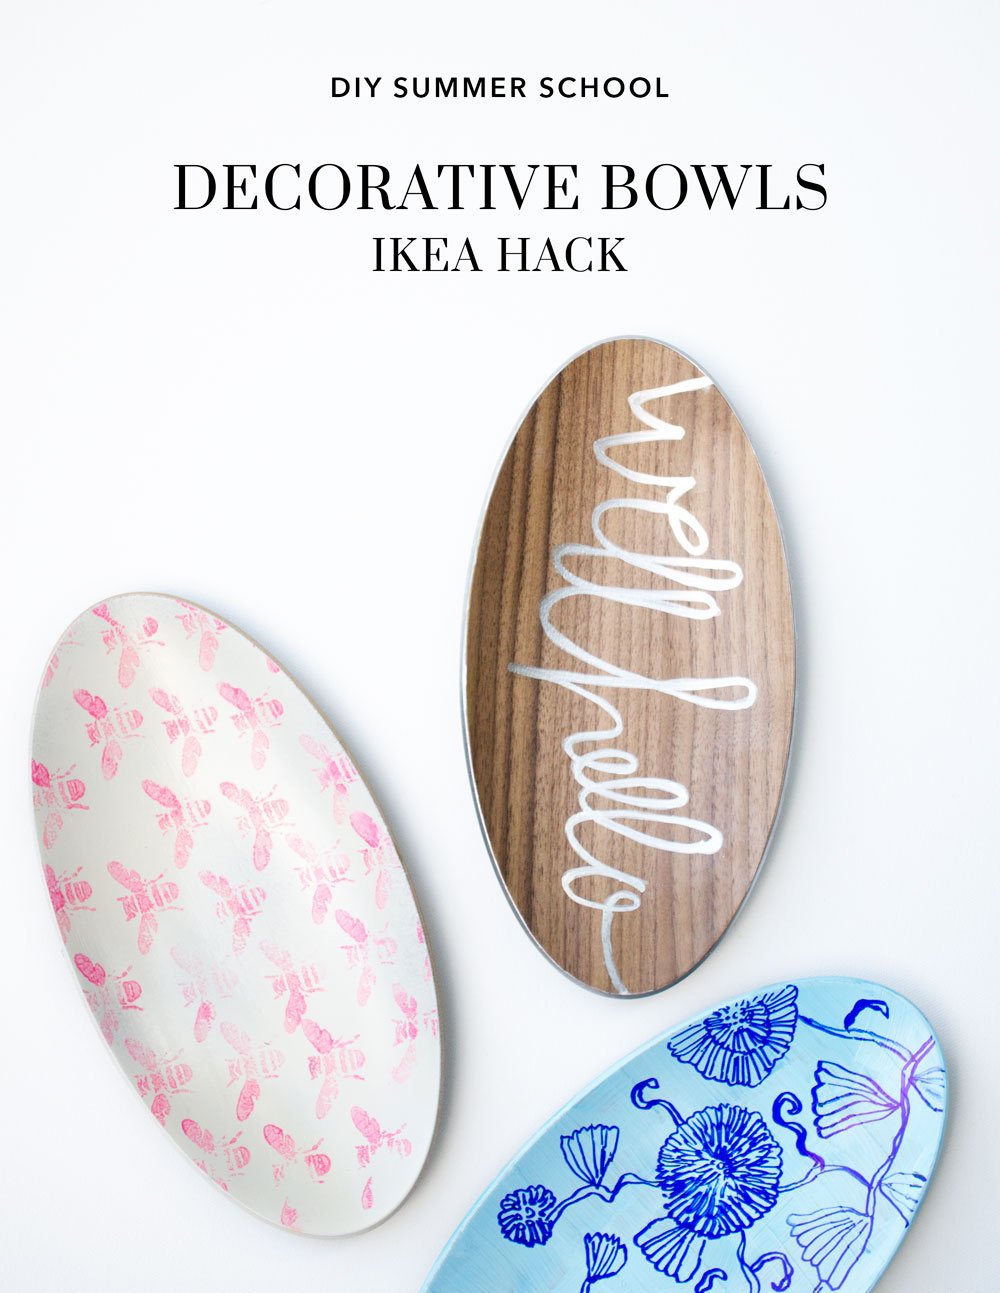 One bowl three ways, an easy decorative bowl #IkeaHack